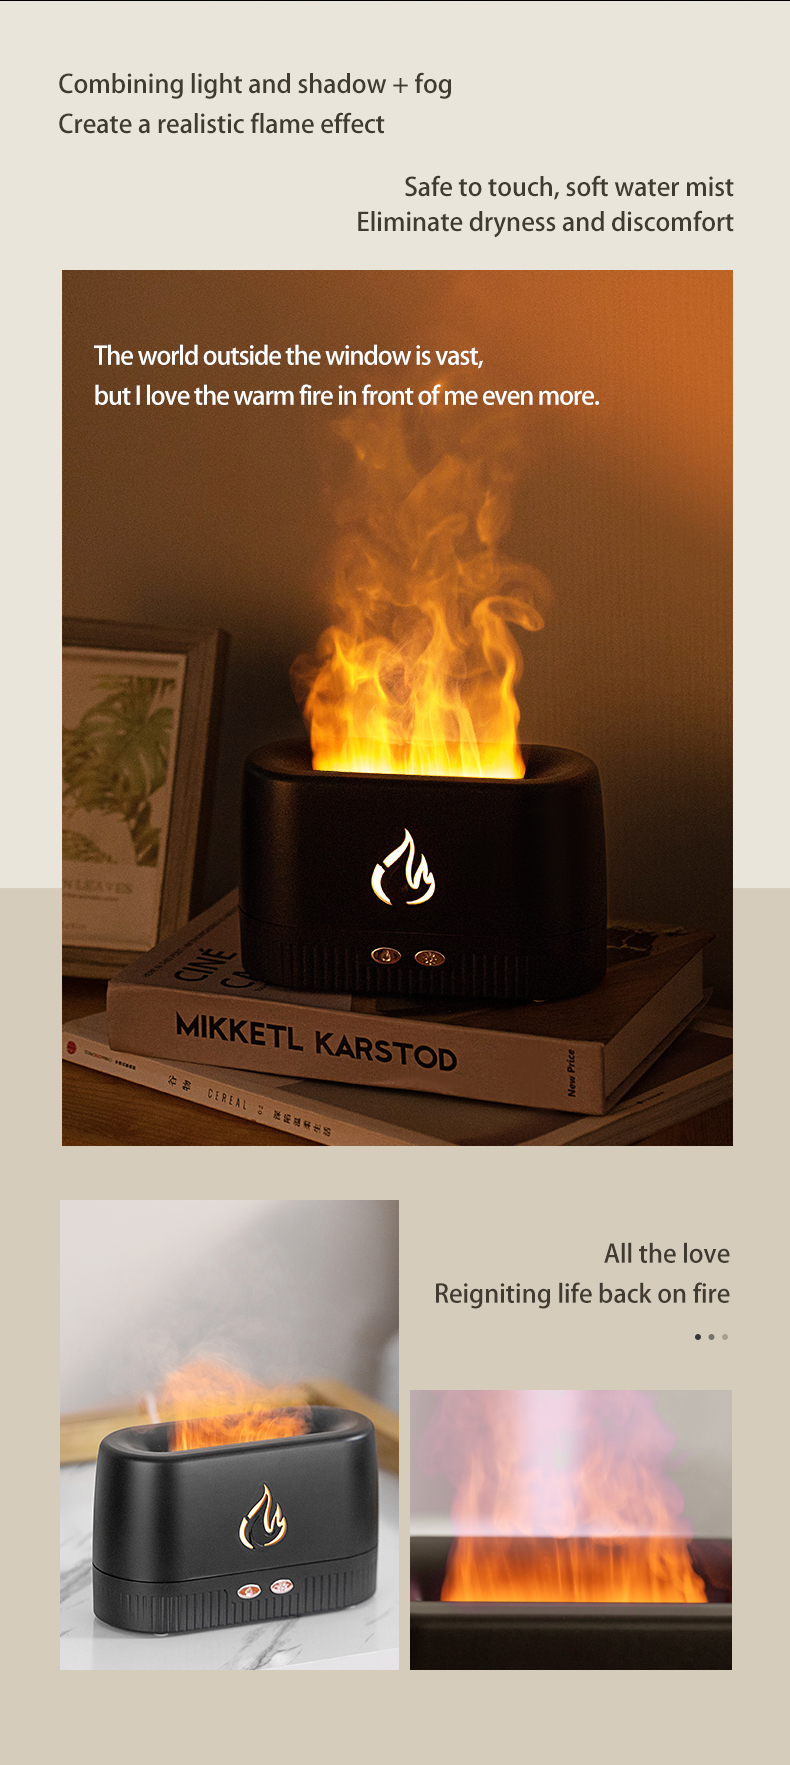 Flame Humidifier Aroma Diffusers